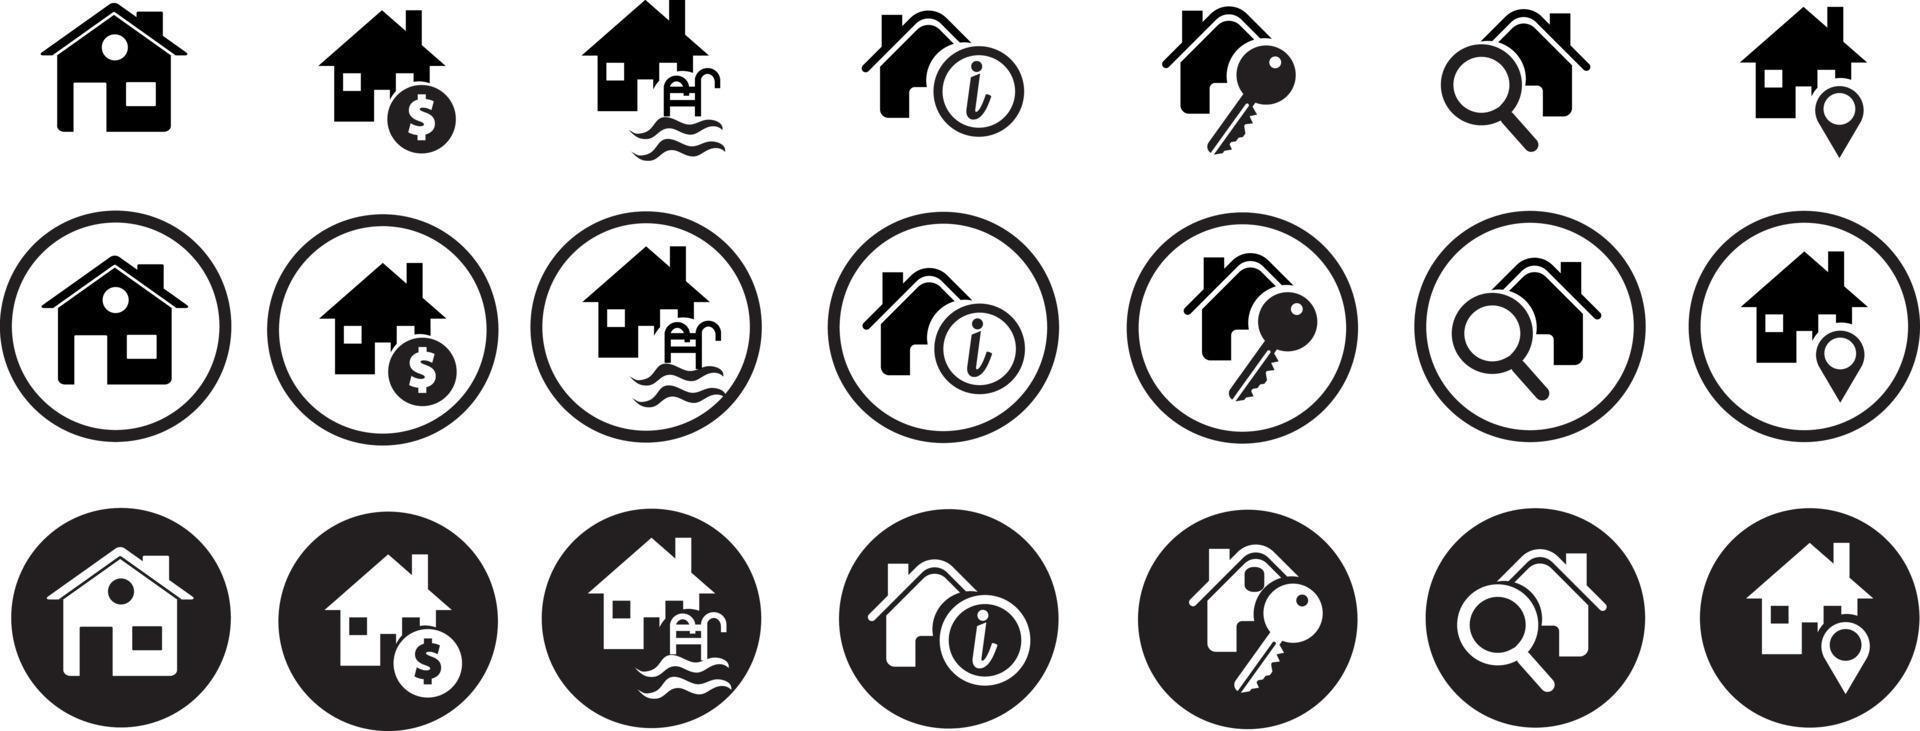 House icons set. Home icon collection. Real estate. Flat style houses symbols for apps and websites on whitr background vector